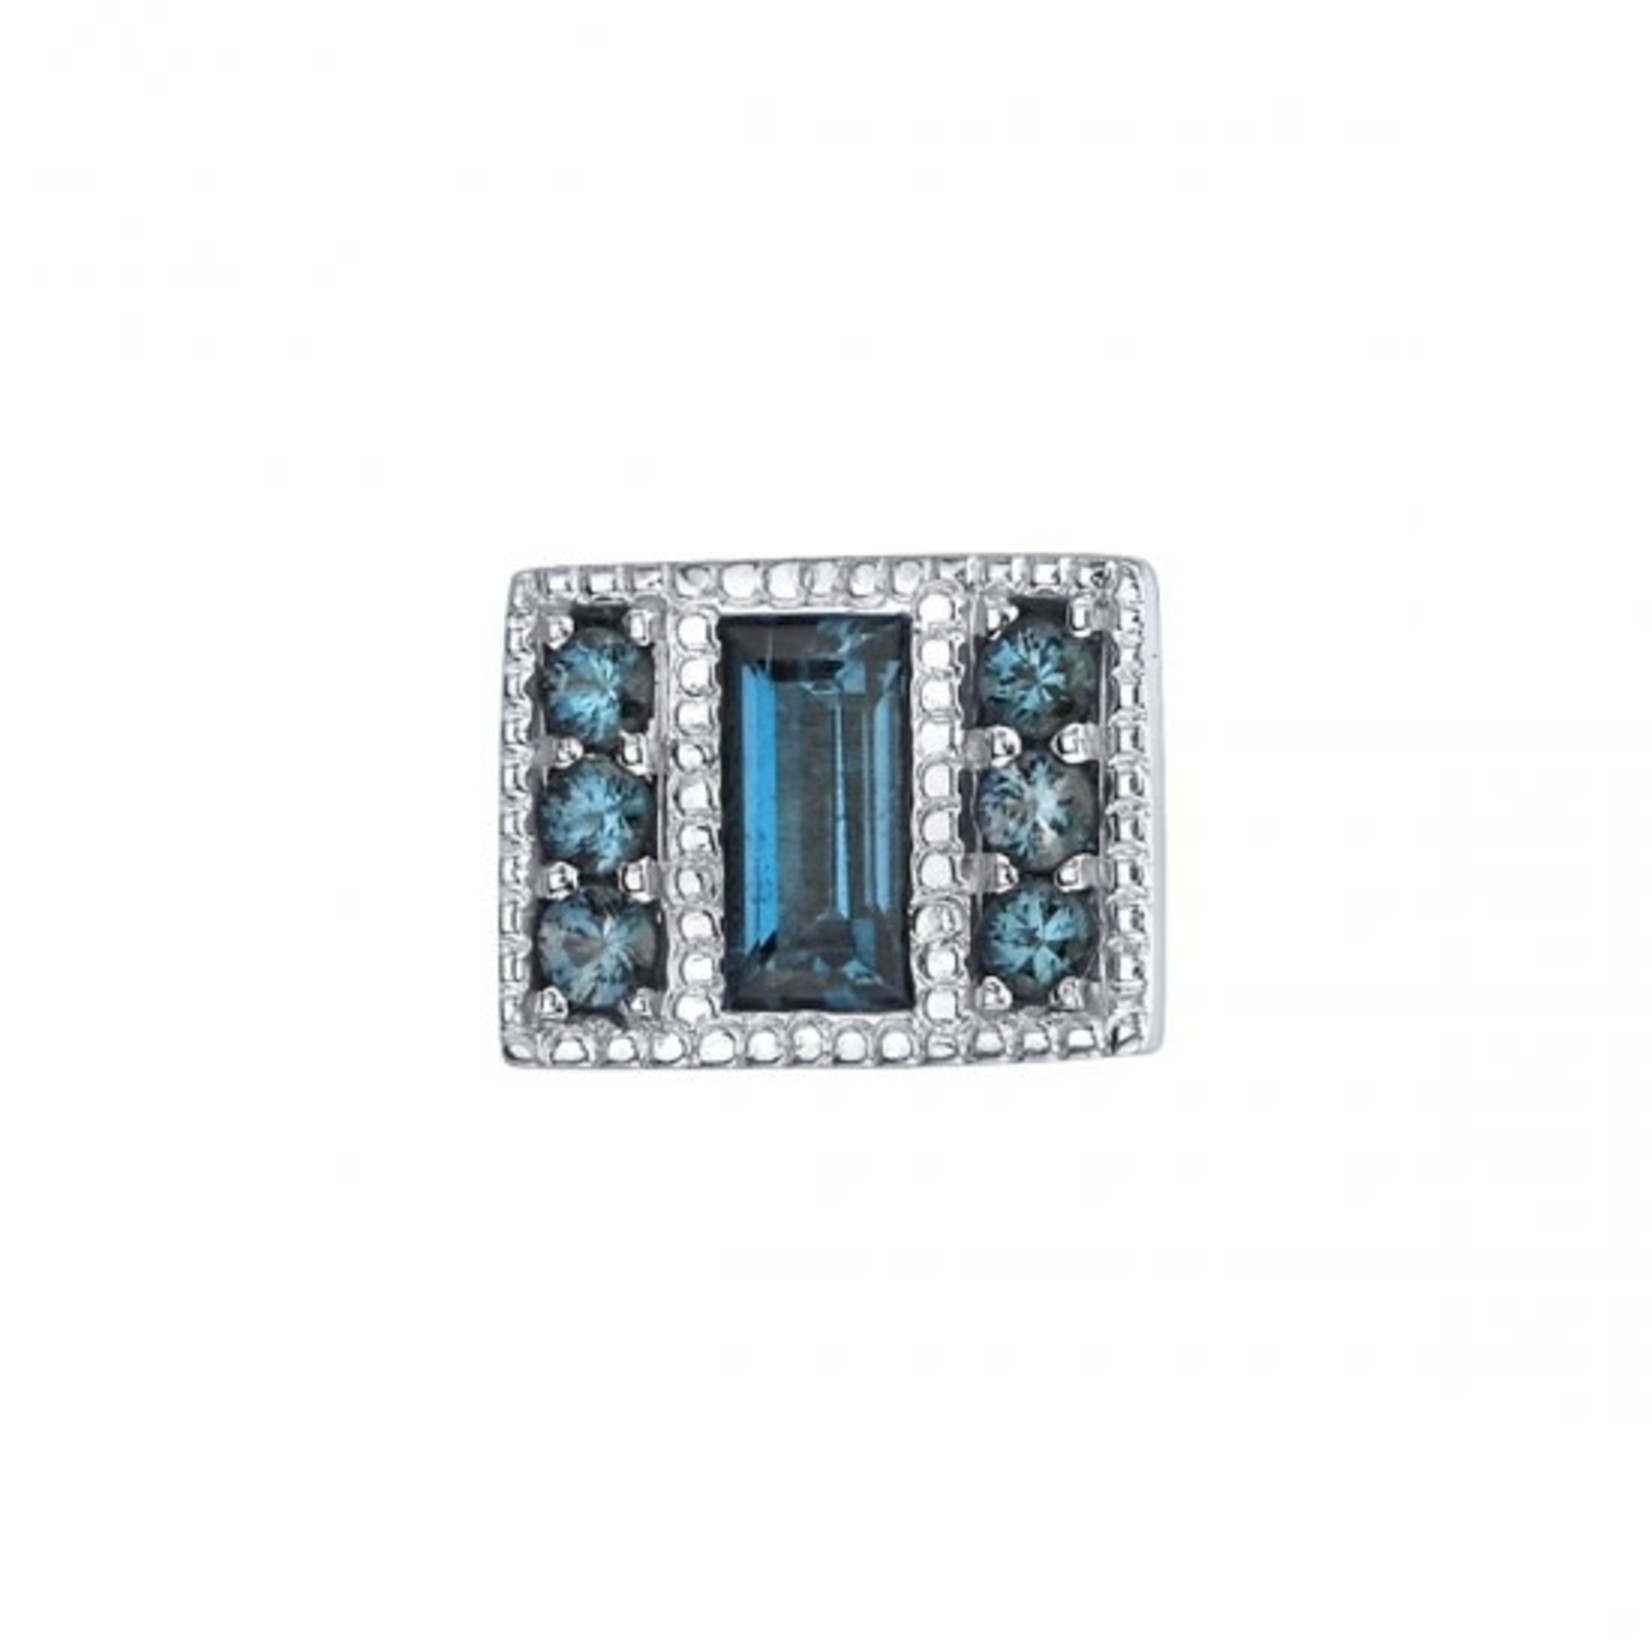 BVLA BVLA white gold "Endymion Rectangle" threaded end with 6x 1.0 London blue topaz & 4x2 London blue topaz baguette